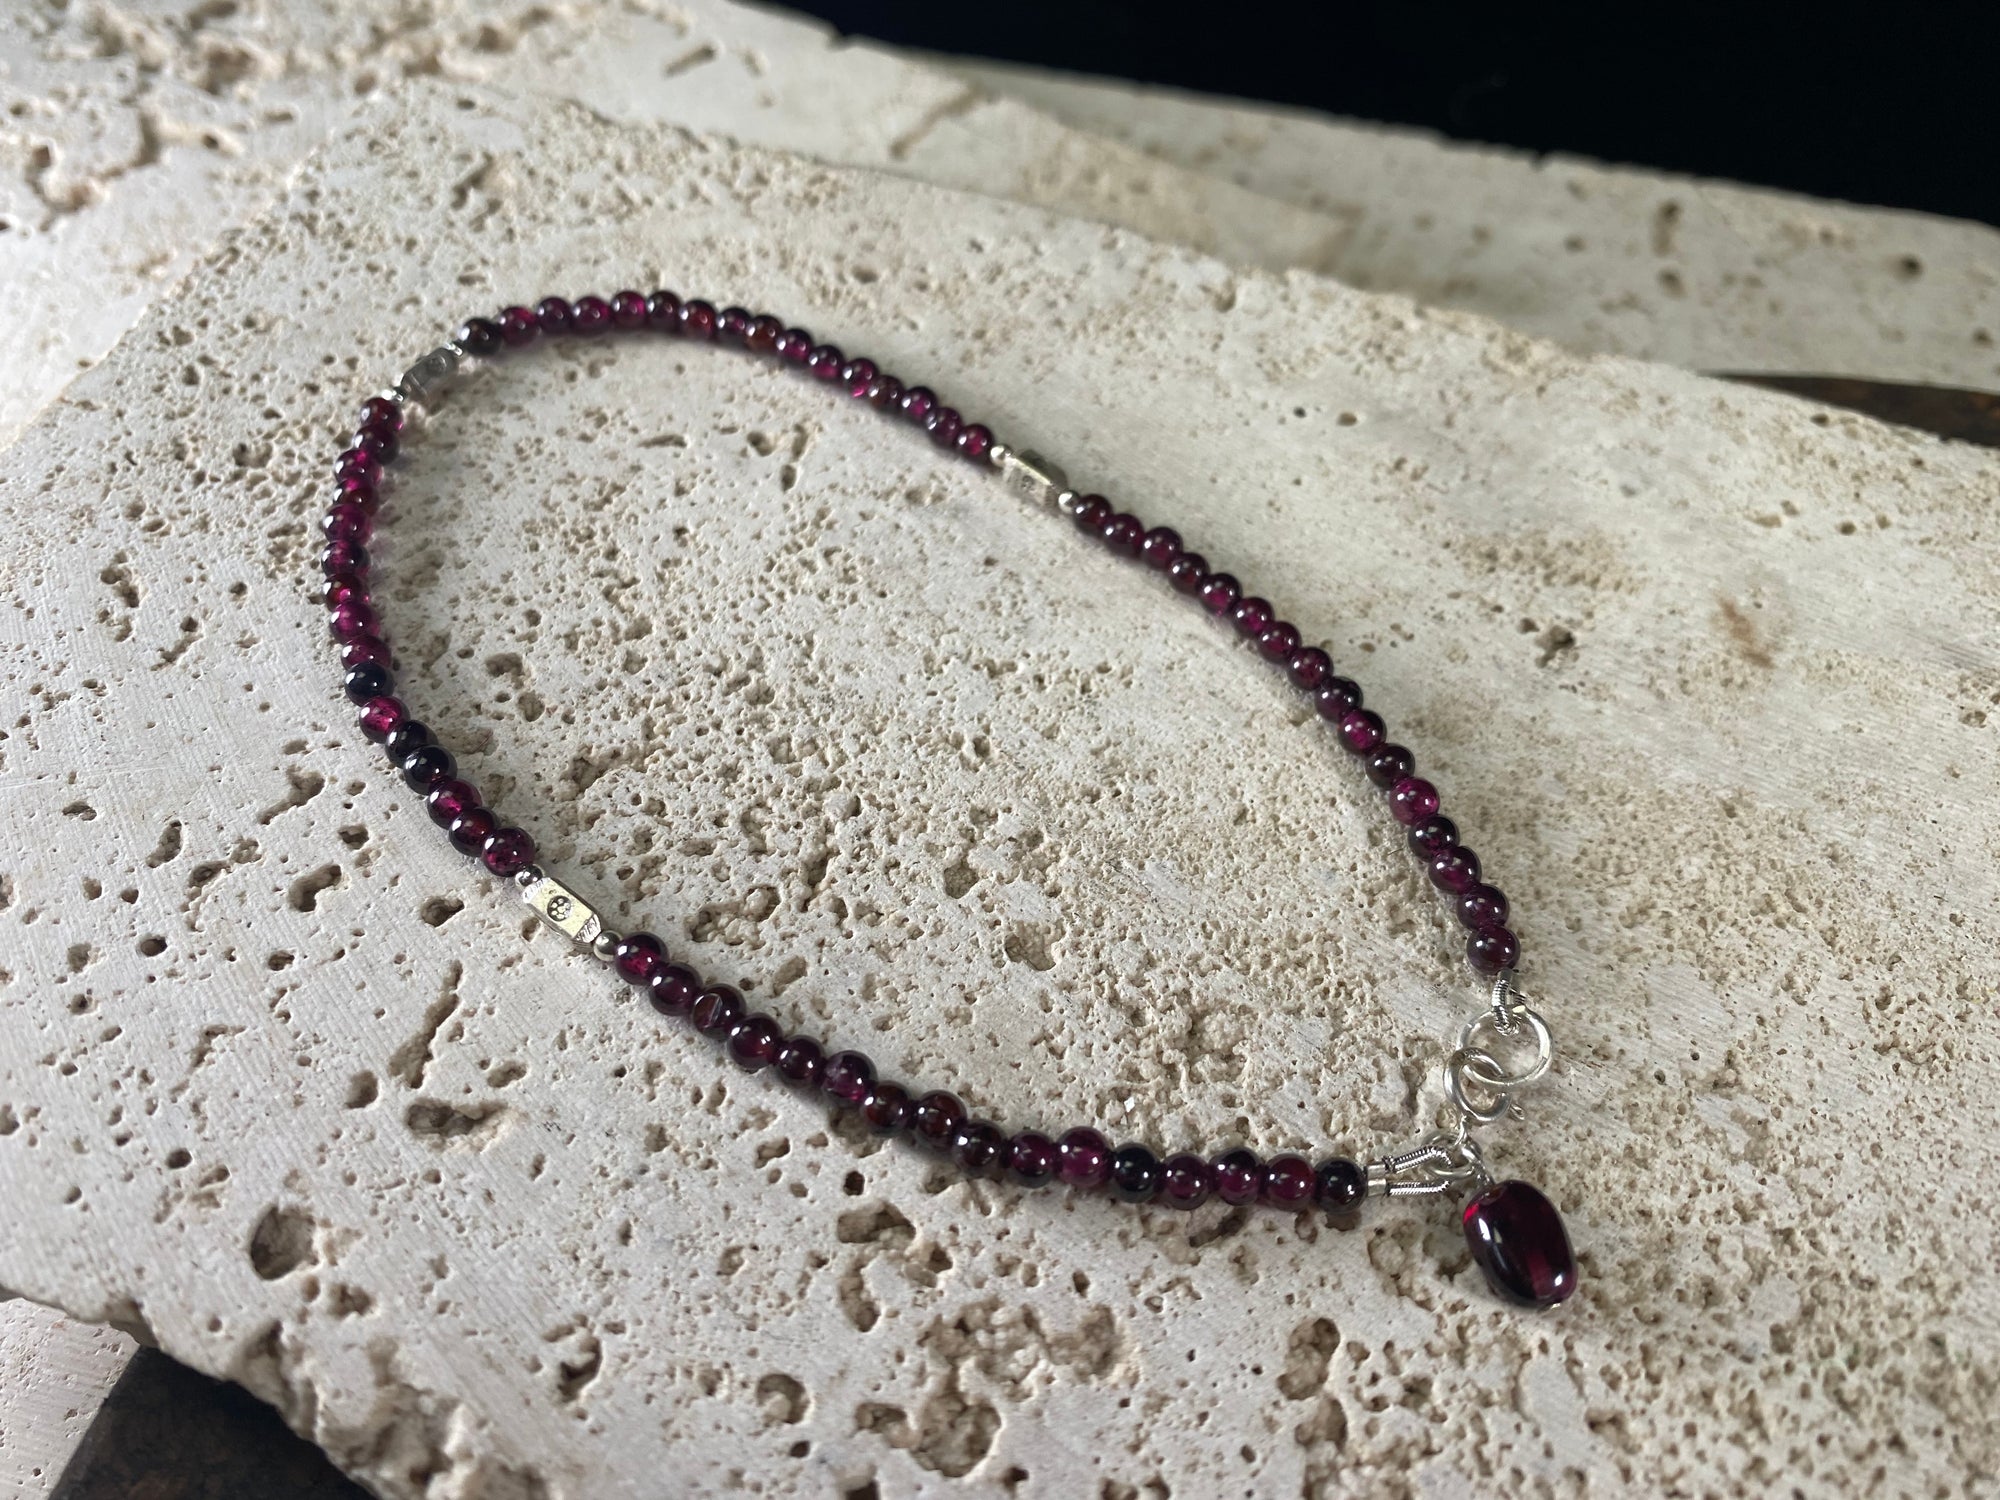 Gypsy anklets featuring natural garnet and sterling silver charms. Sterling silver clasps and detailing, with a garnet pendant that sits at the back of the anklet. Designed to sit gracefully around the foot rather than tight to the ankle. Select from three sizes